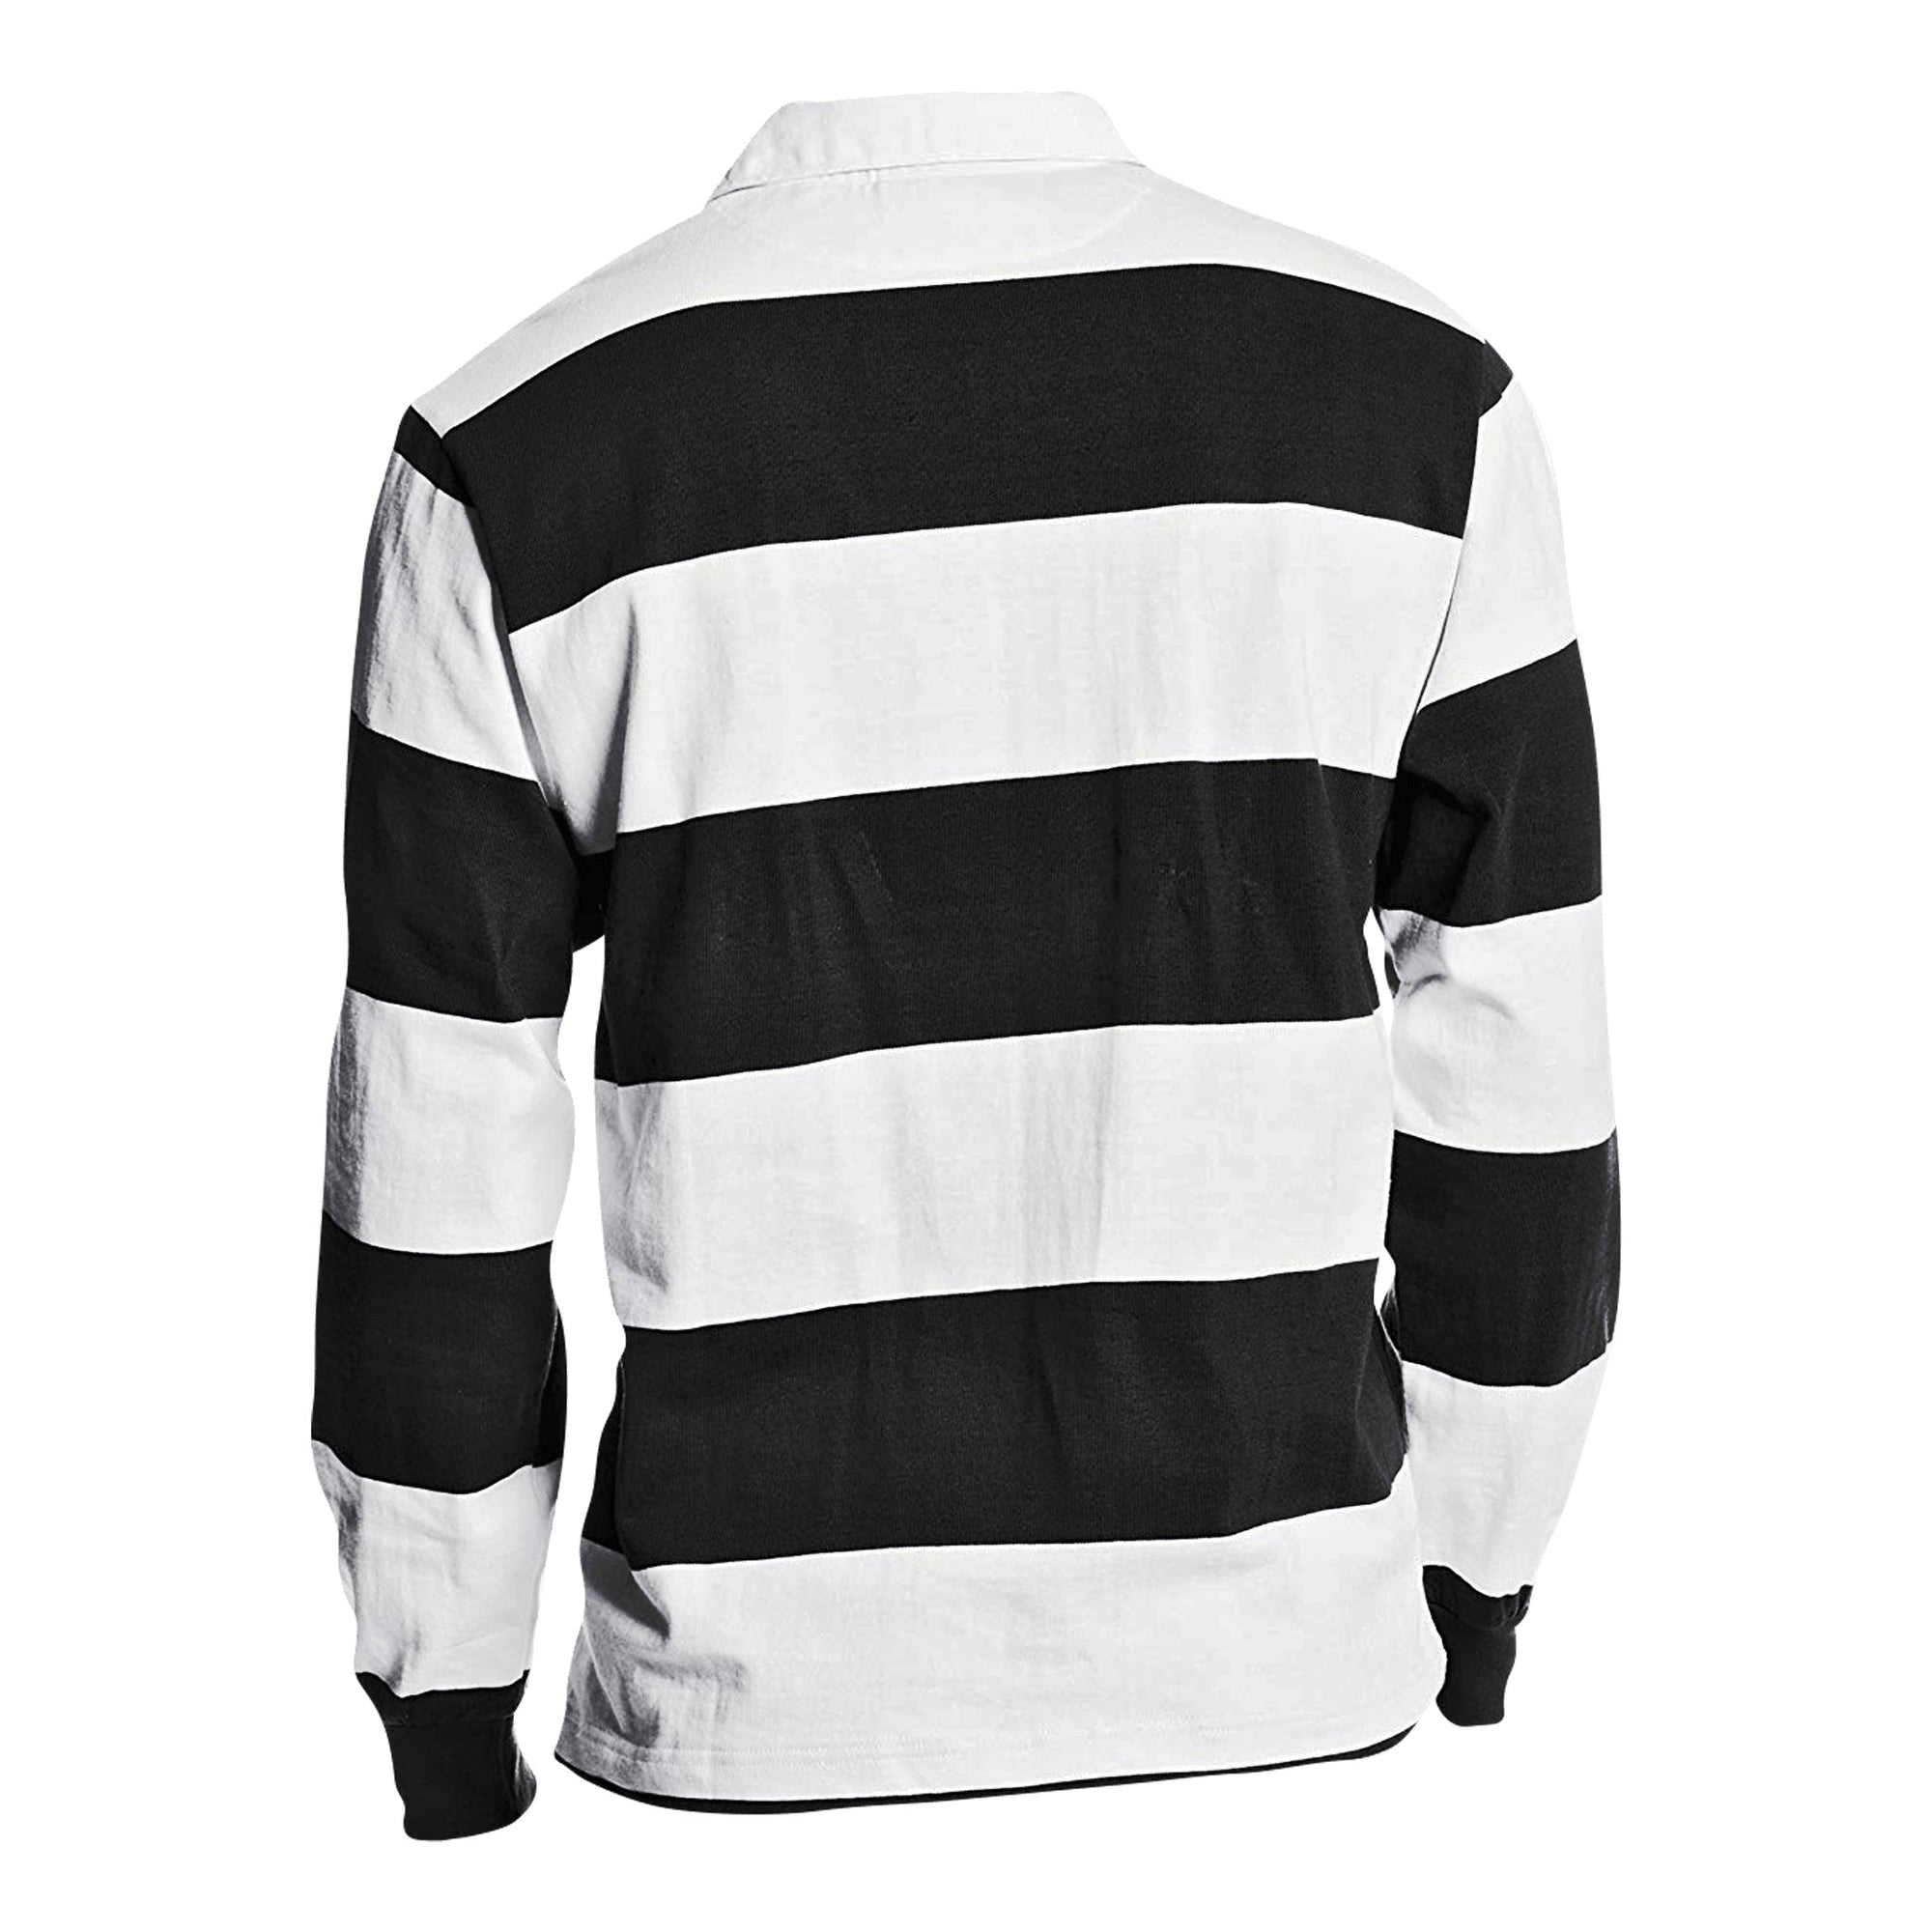 Rugby Imports Plymouth State WRFC Cotton Social Jersey